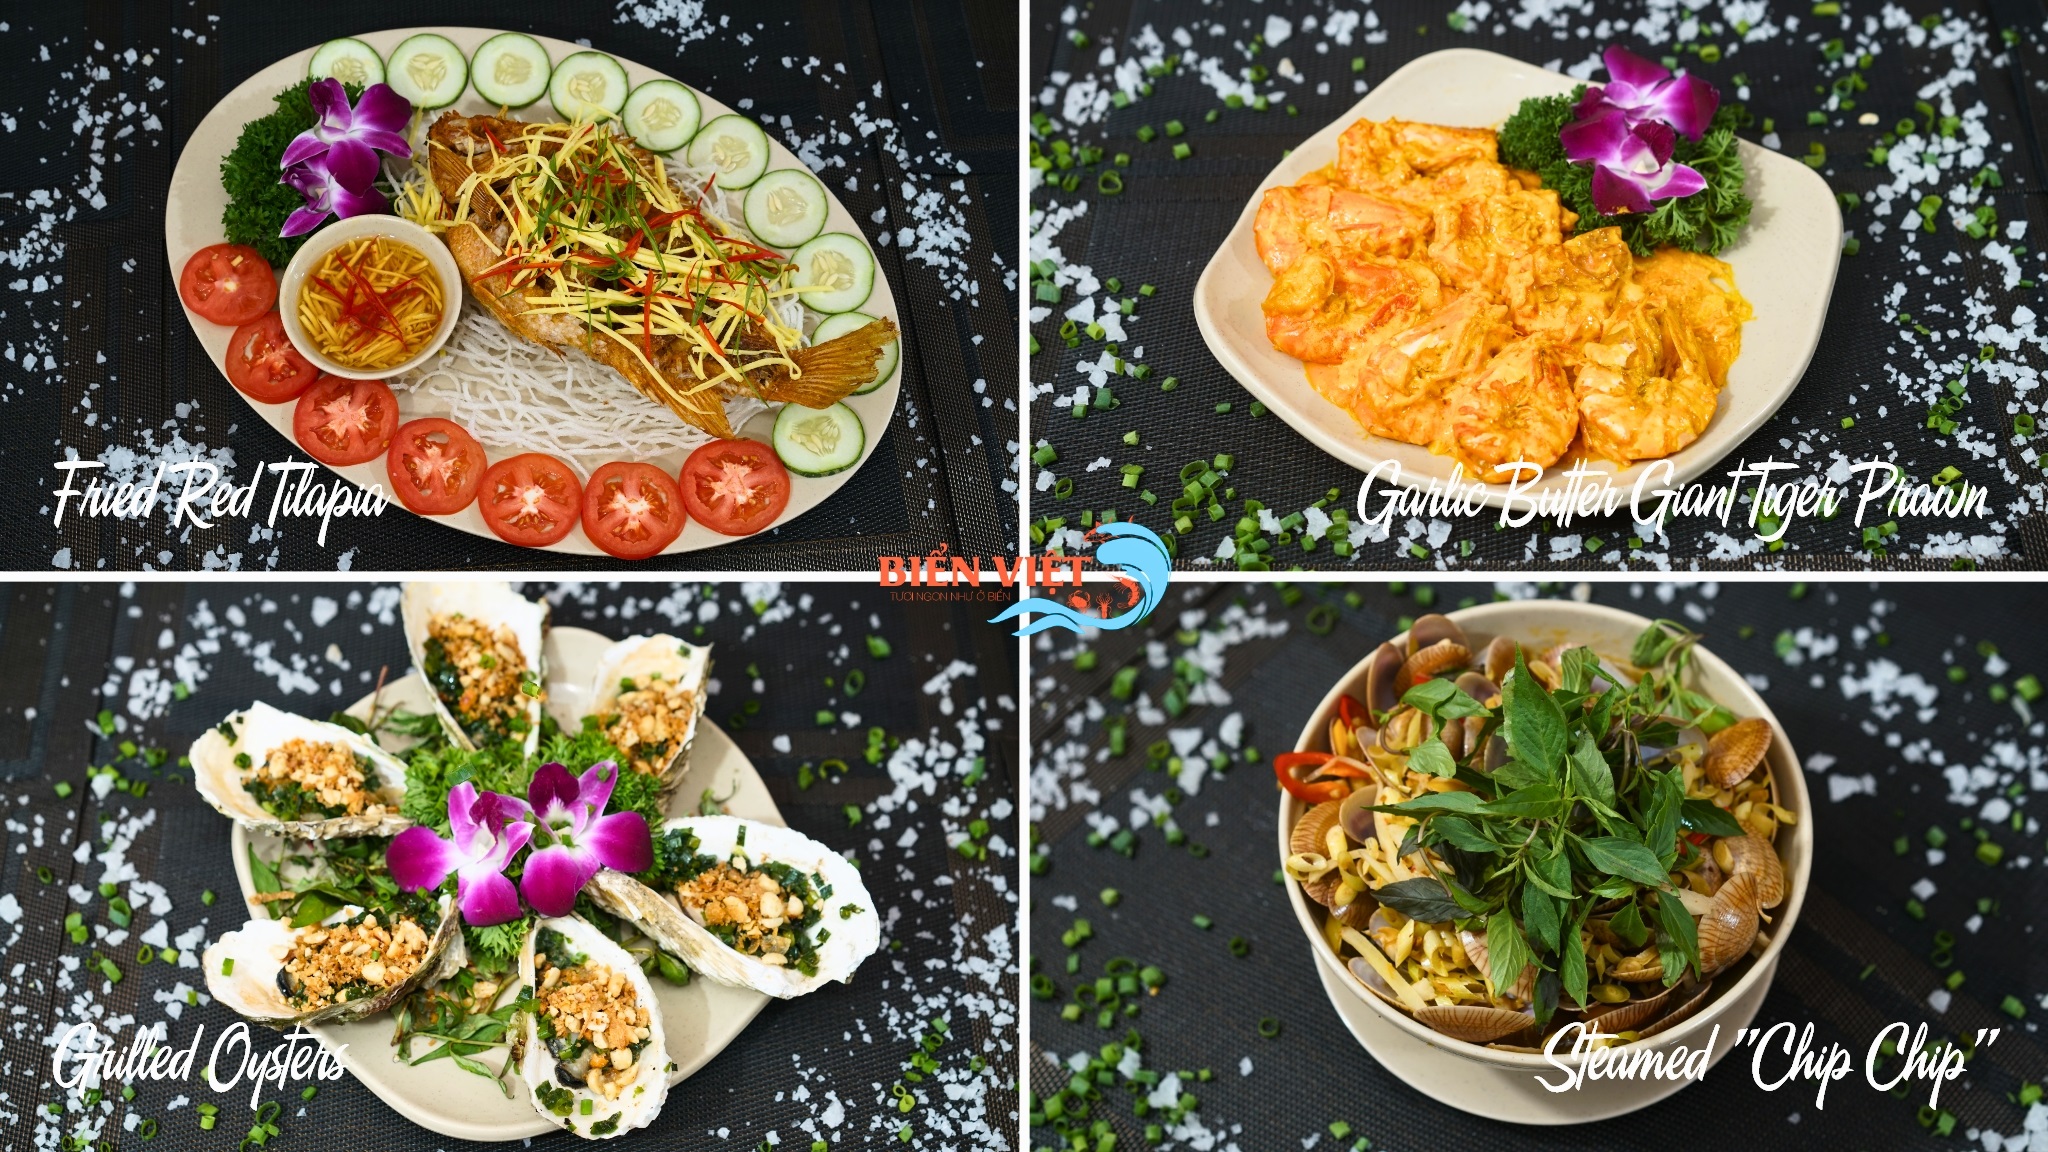 Appealing Best Selling Dishes At Bien Viet Restaurant